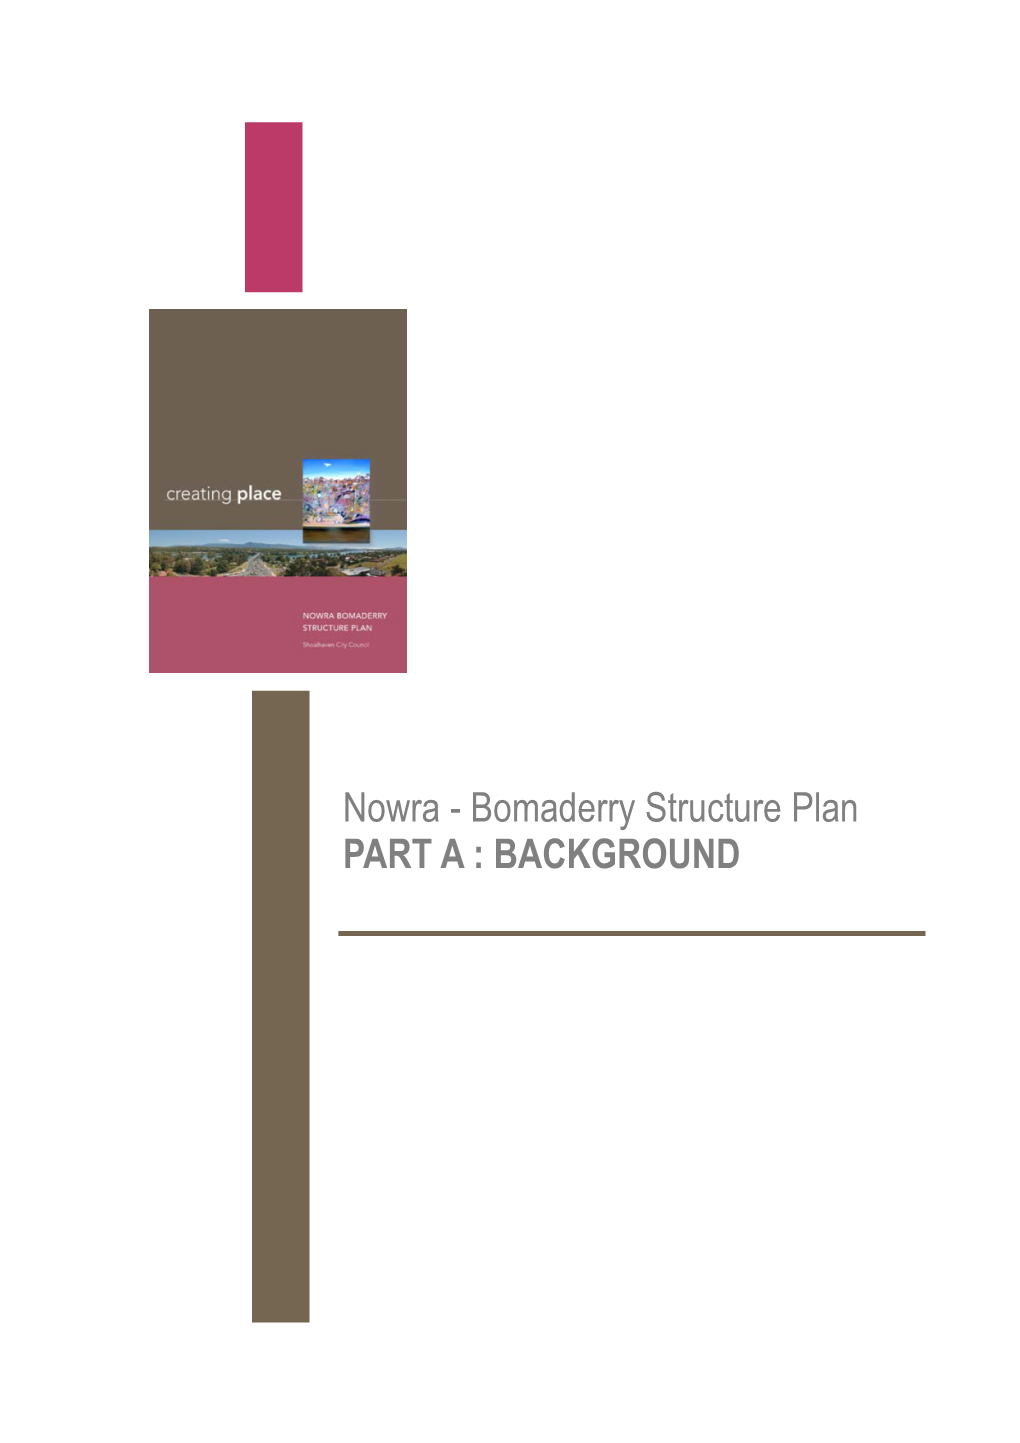 Nowra Bomaderry Structure Plan Part a Background